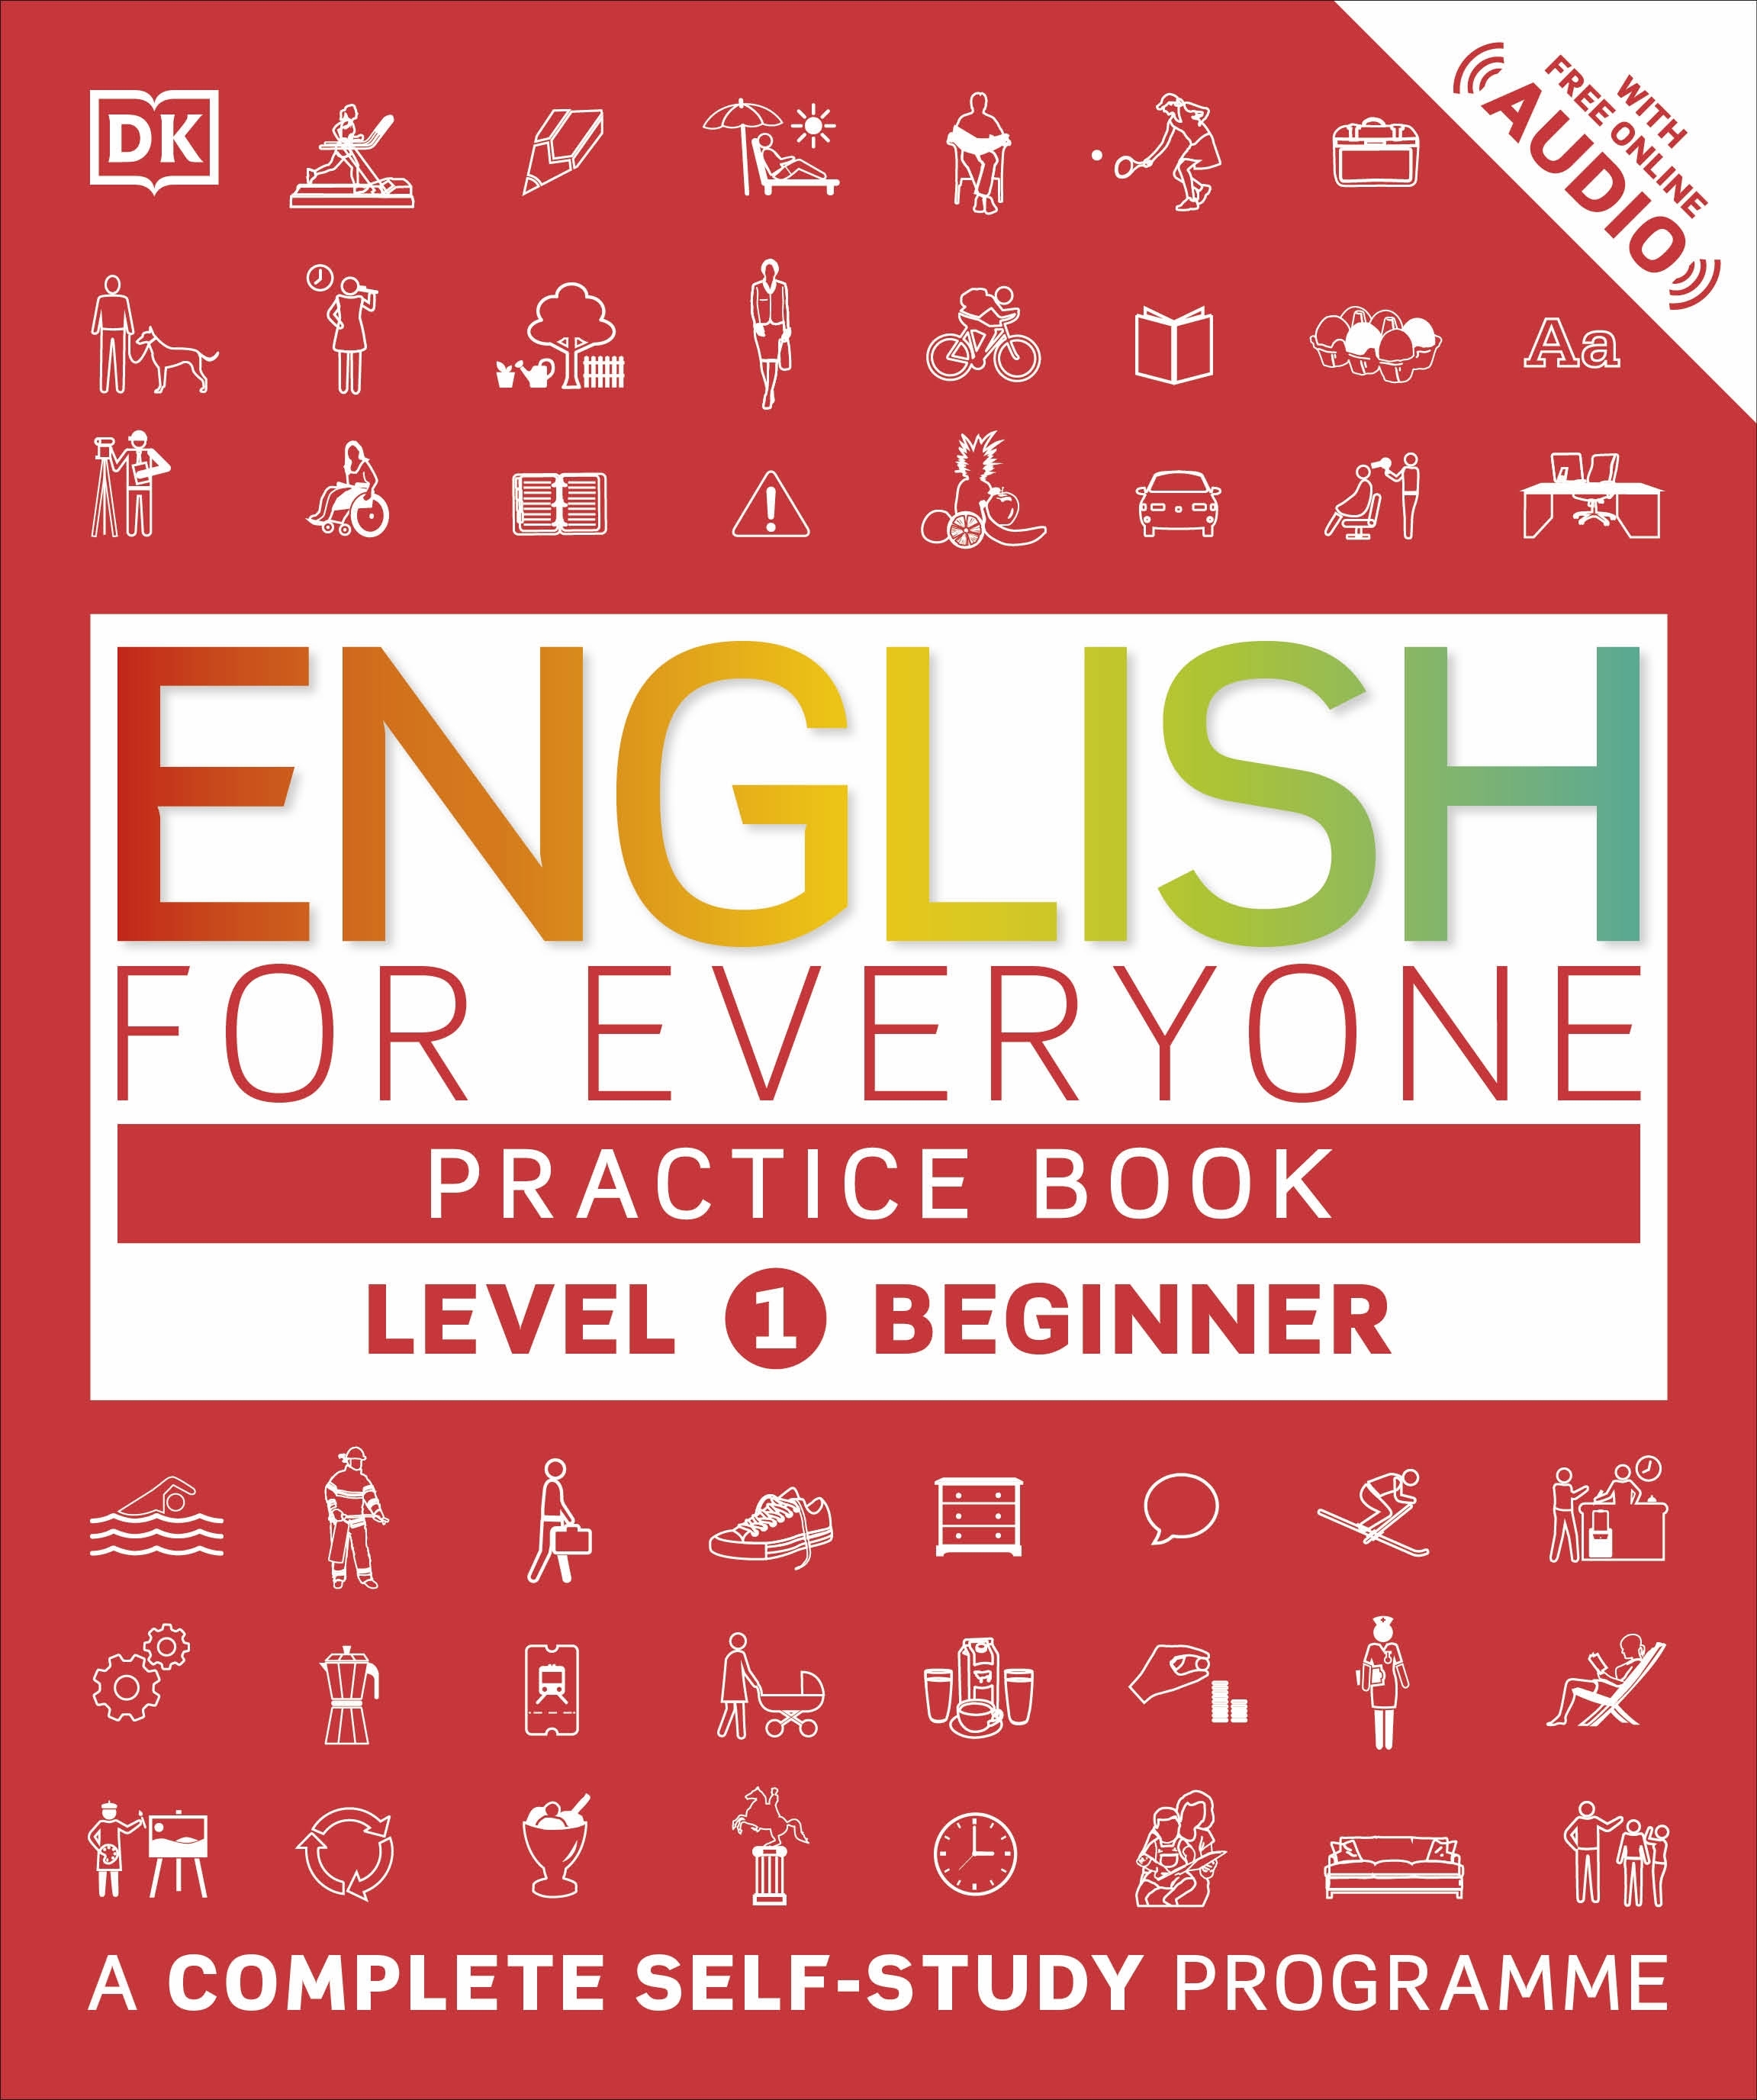 English for Everyone Practice Book Level 1 Beginner by DK - Penguin